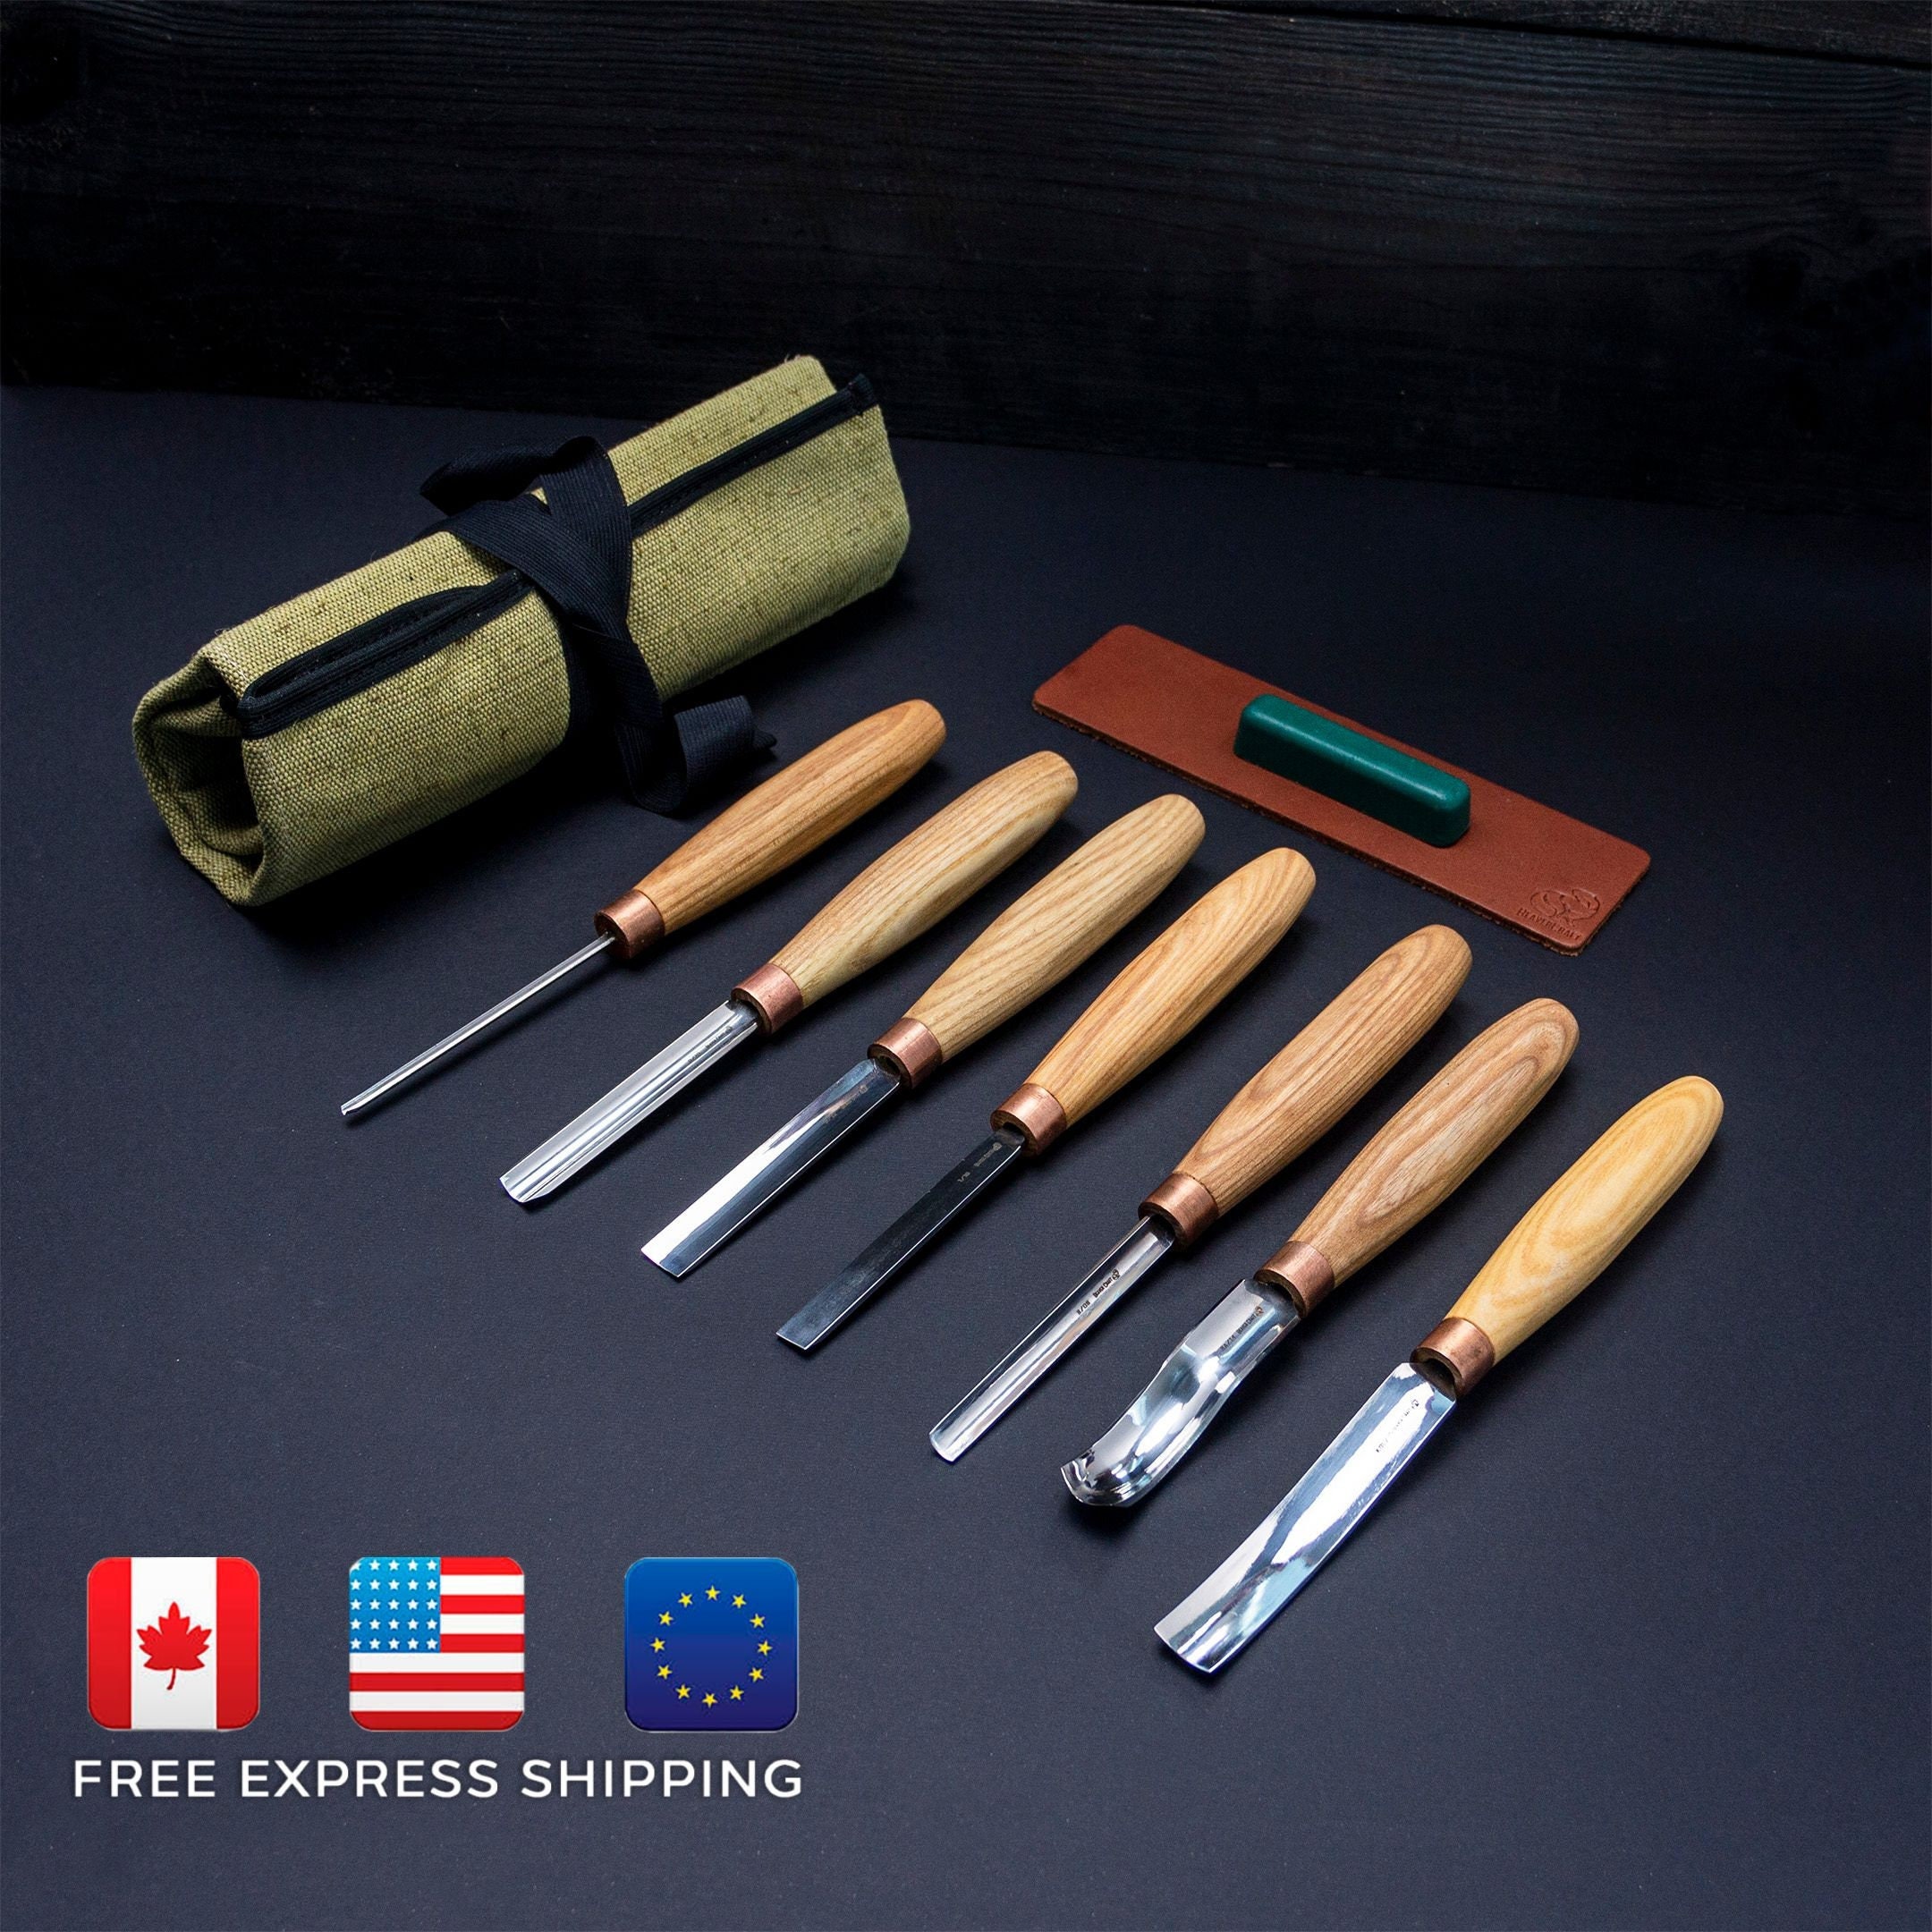 Libraton Woodworking Chisel Set, 4pcs Cr-V Wood Chisels Set, Professional  Chisels with Leather Pouch for Carpenter